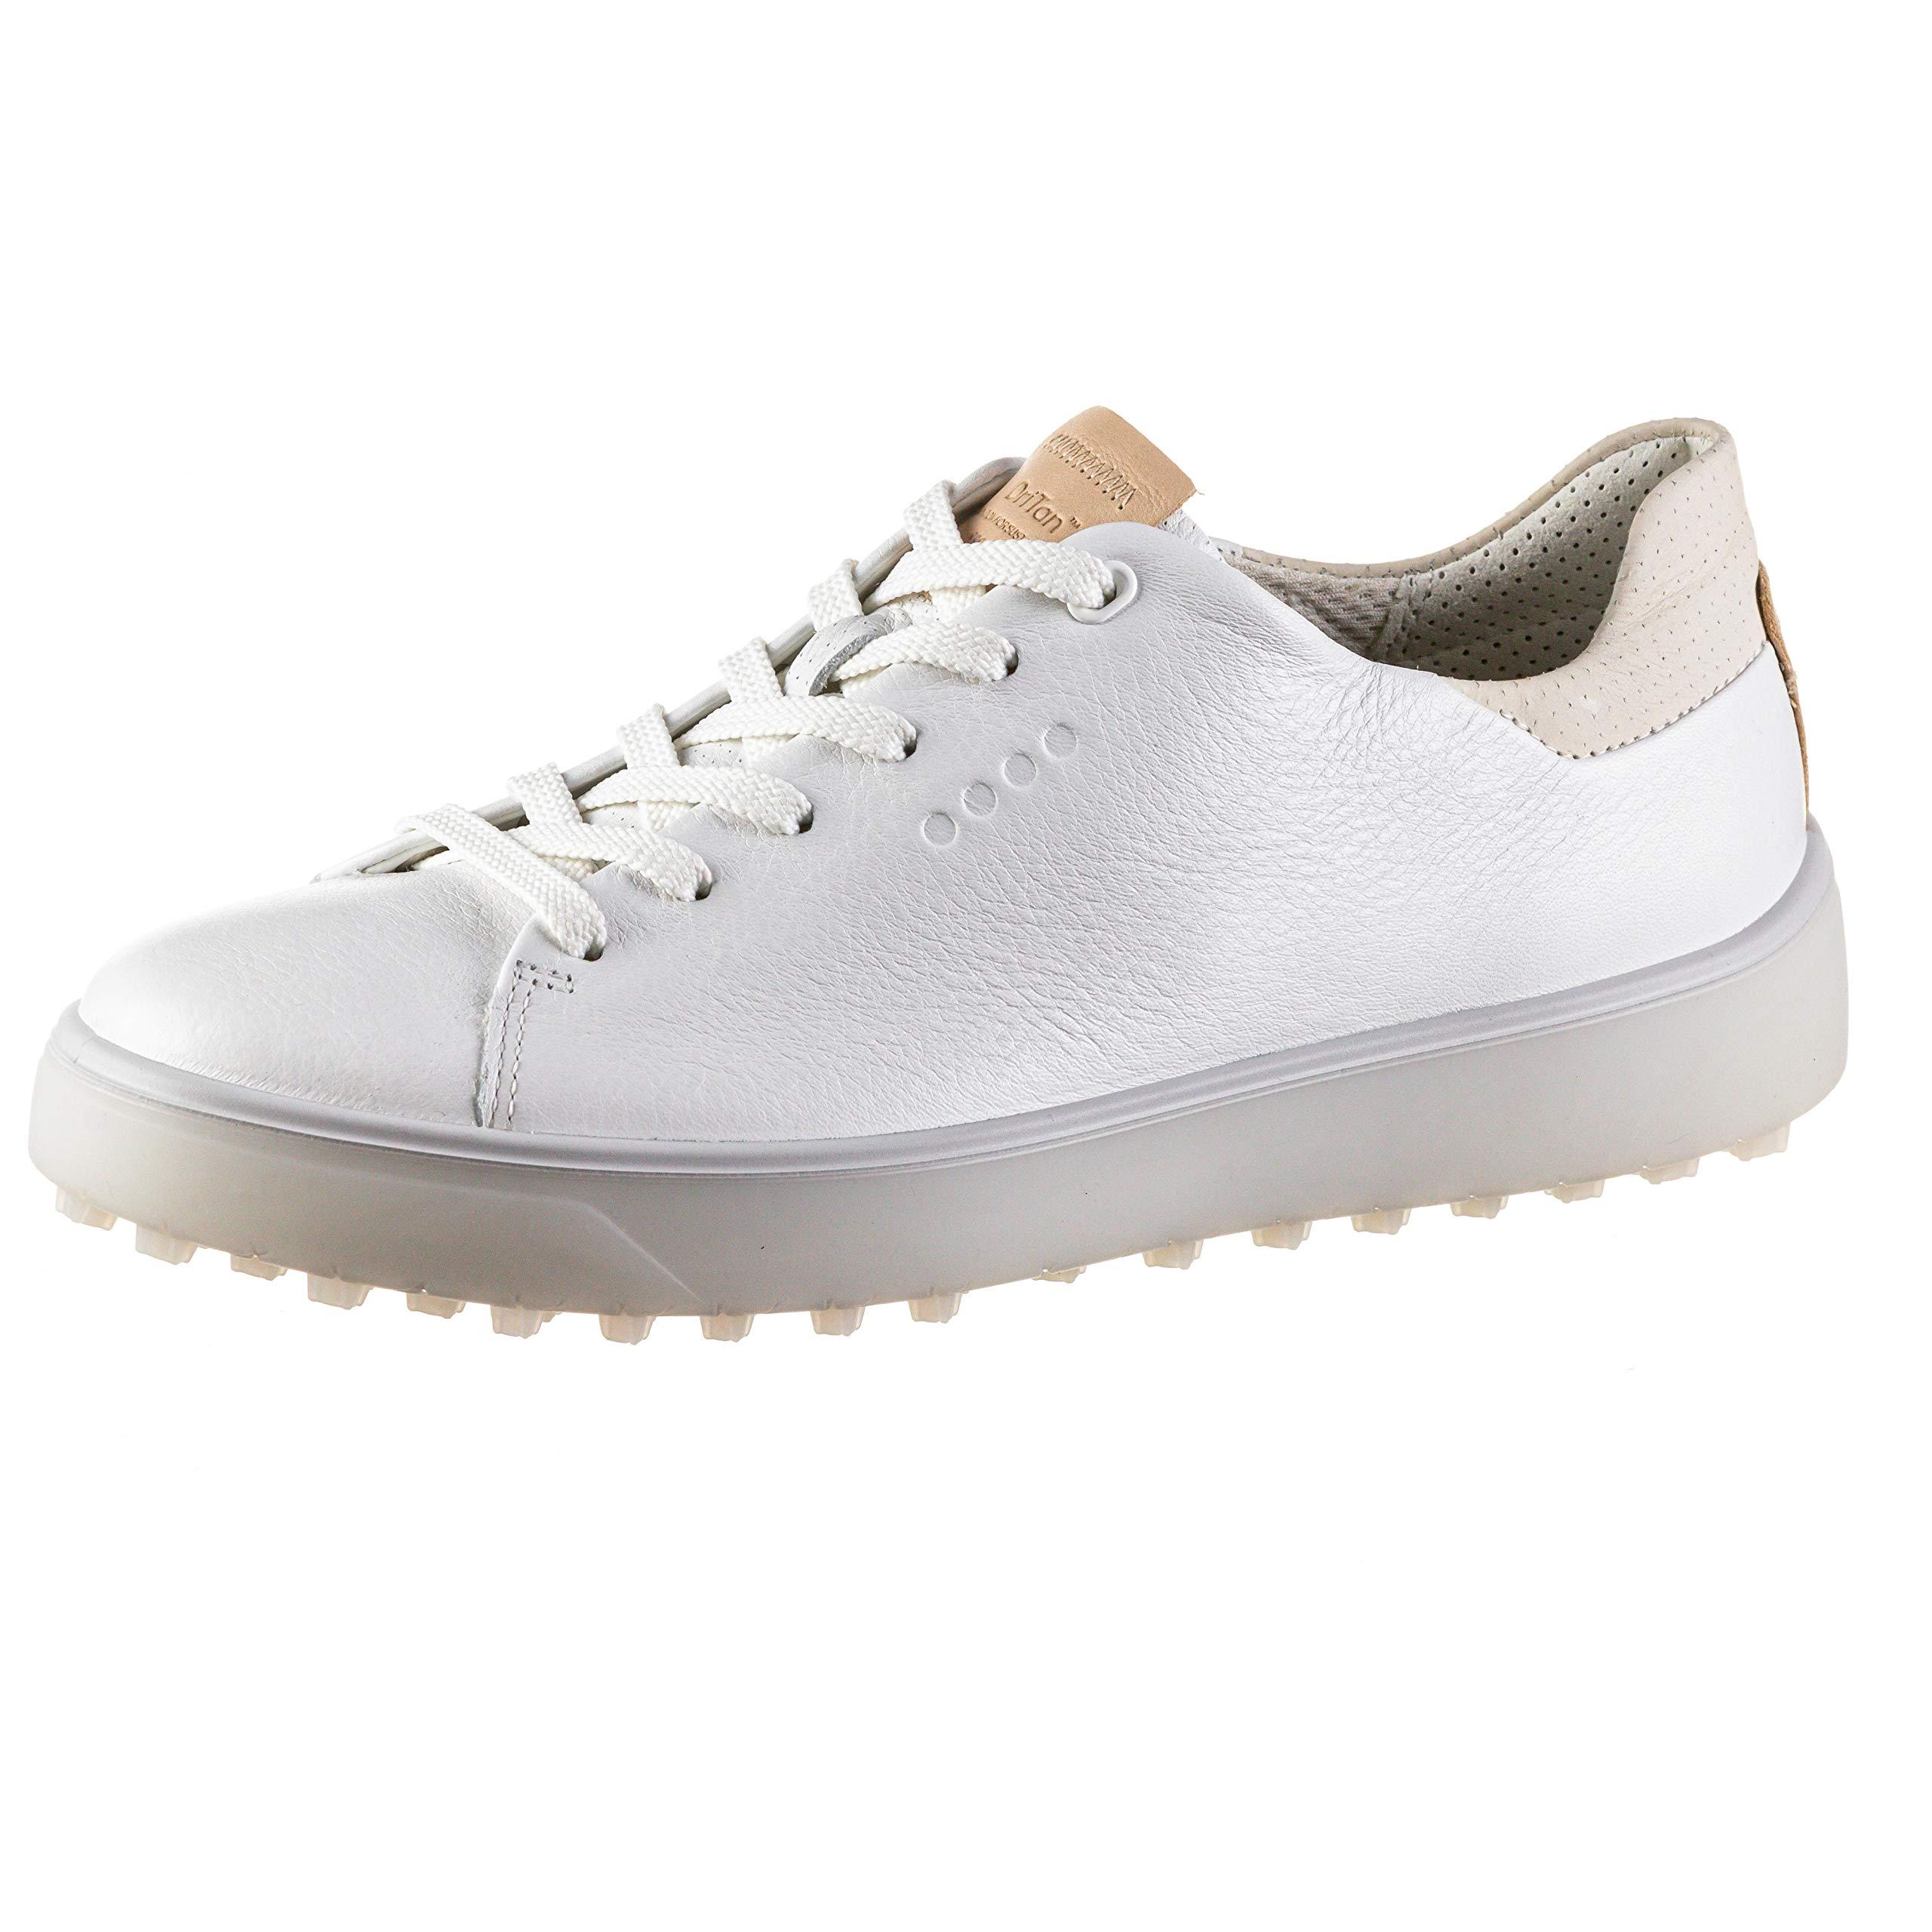 Ecco Leather Tray Hybrid Hydromax Water-resistant Golf Shoe in Bright White  (White) - Save 29% - Lyst